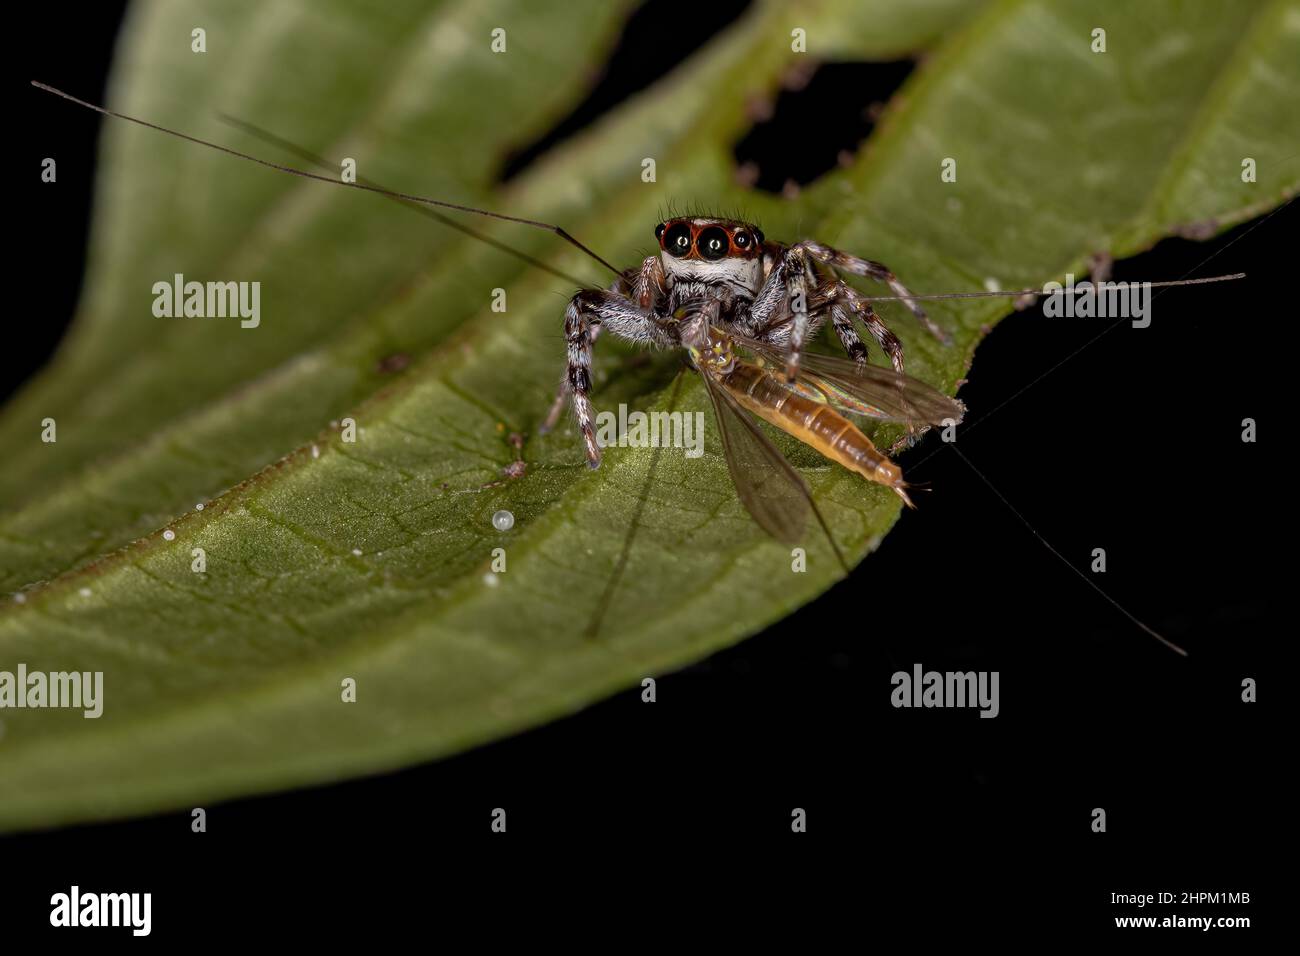 Small Jumping Spider of the species Philira micans preying on a fly Stock Photo